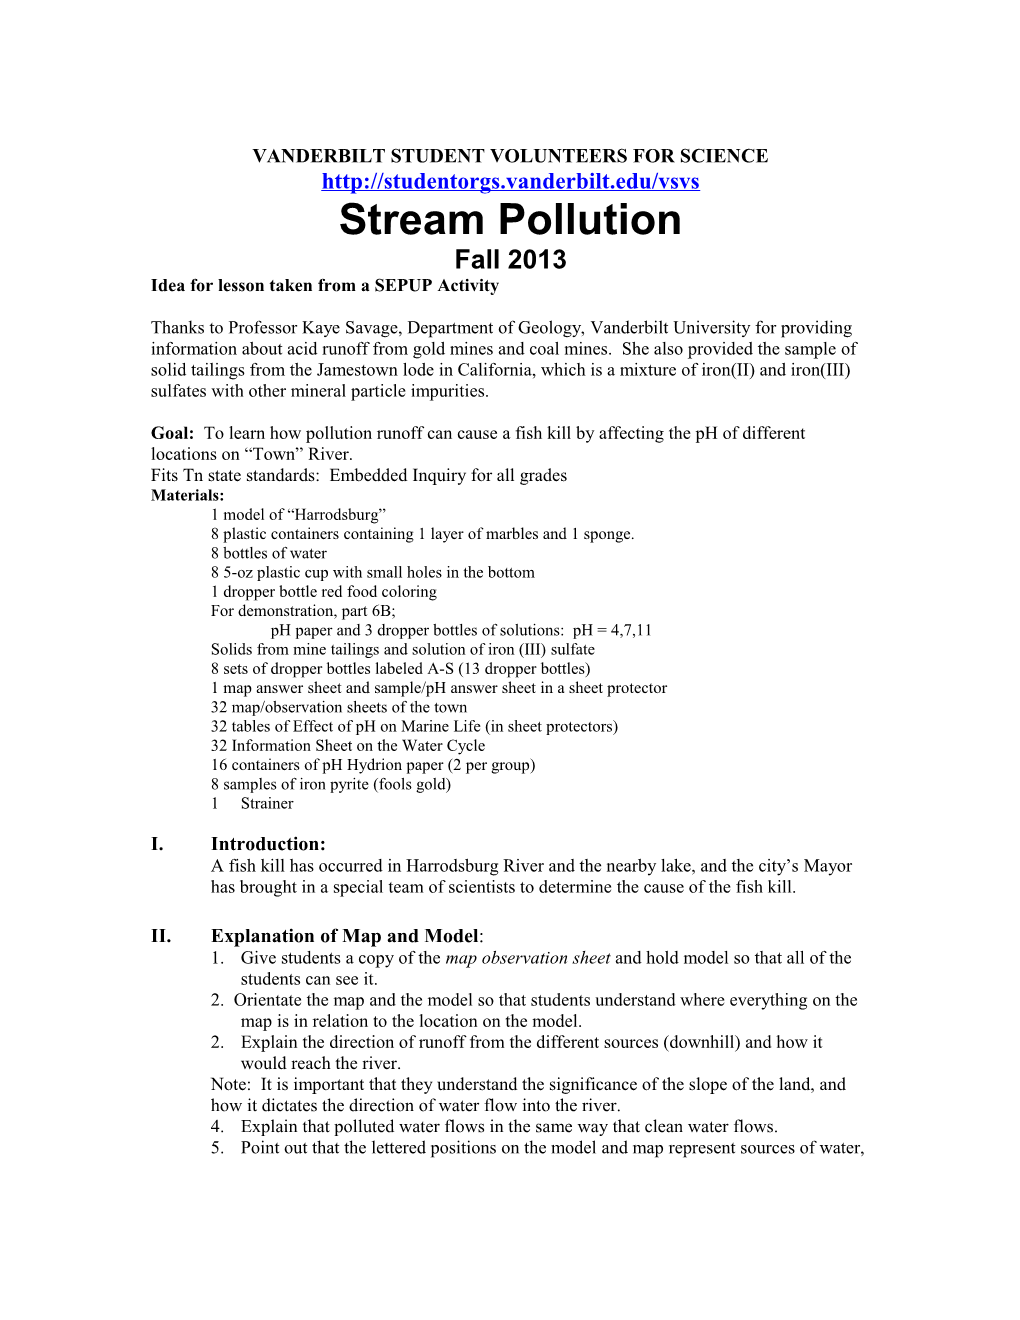 Pollution in the Town Creek